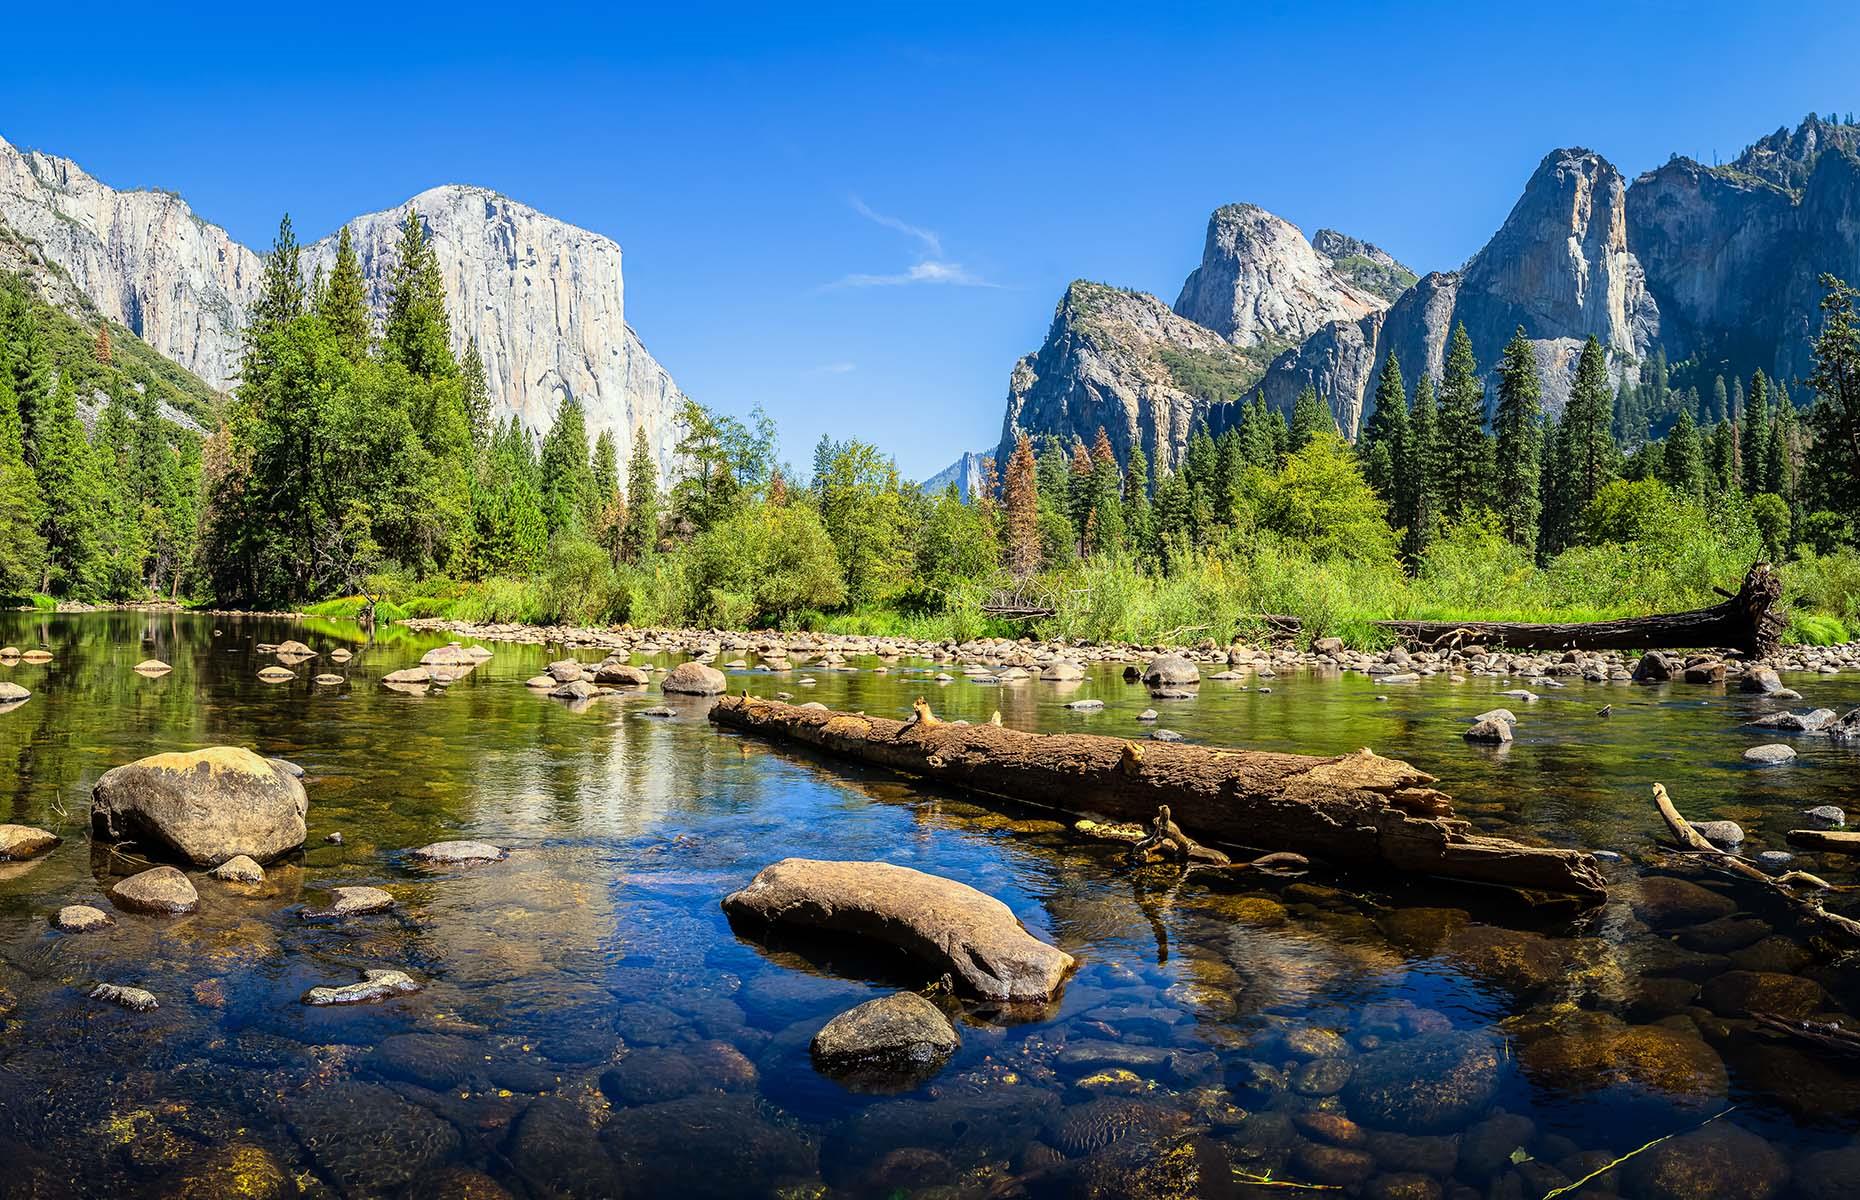 <p>Famed for its awe-inspiring vistas, cliffs and lush forests, Yosemite National Park is full of big-hitter attractions, but there's nothing quite like Yosemite Valley. Seen here from the Tunnel View viewpoint, you can really appreciate the jaw-dropping landscape in all its splendor.</p>  <p><a href="https://www.loveexploring.com/galleries/107668/historic-photos-of-americas-national-parks?page=1"><strong>Take a look at historic photos of America's national parks</strong></a></p>